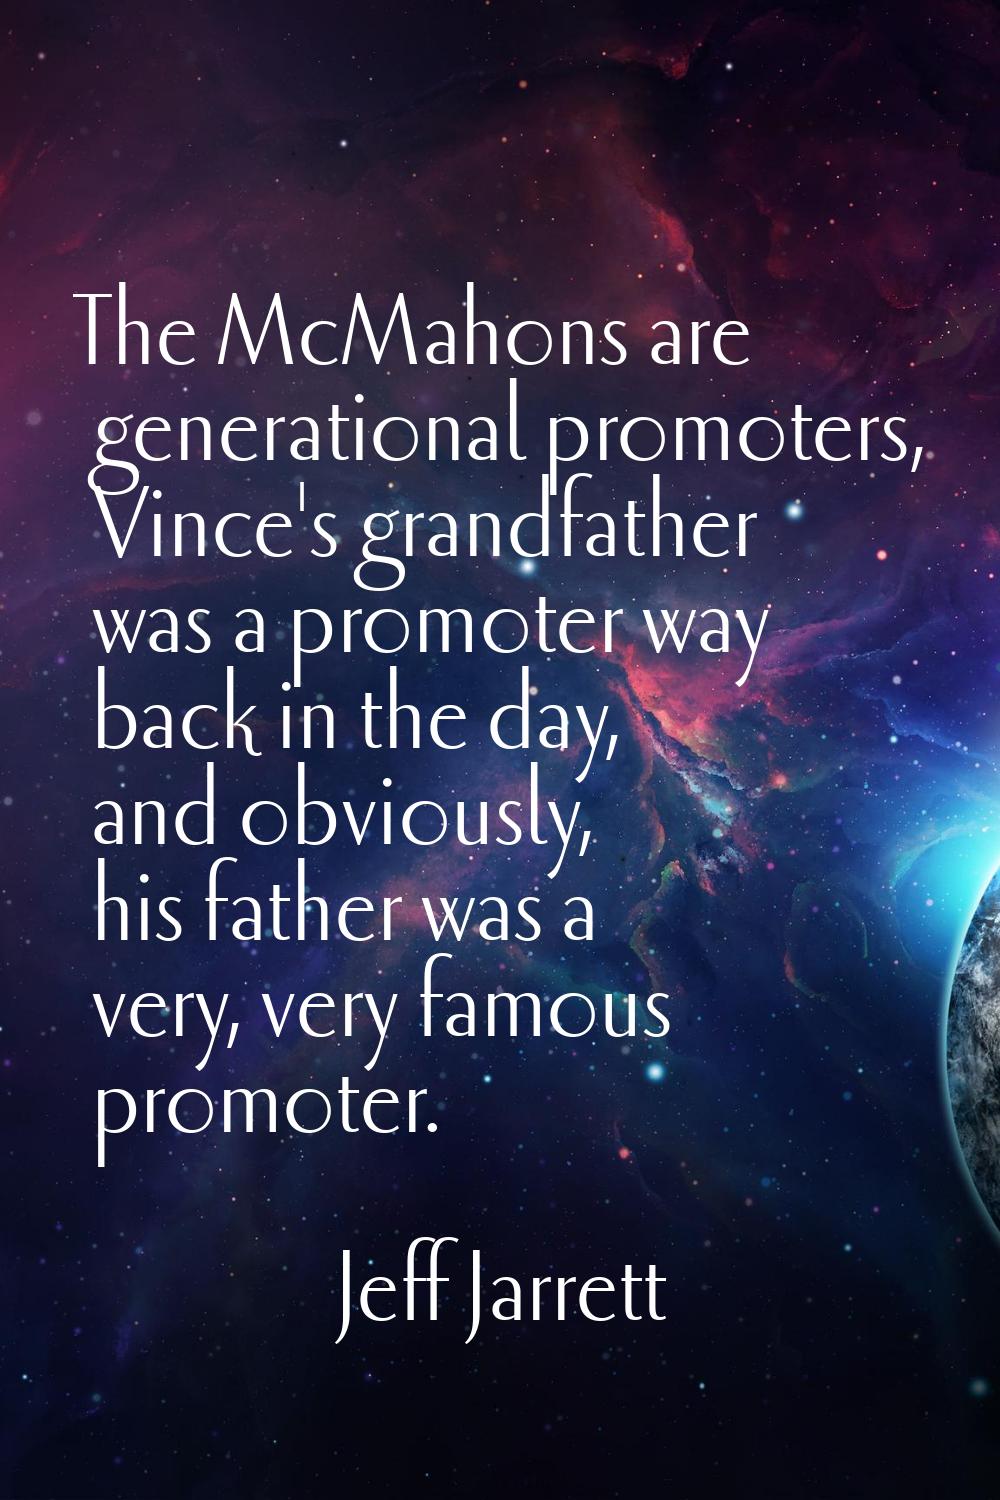 The McMahons are generational promoters, Vince's grandfather was a promoter way back in the day, an